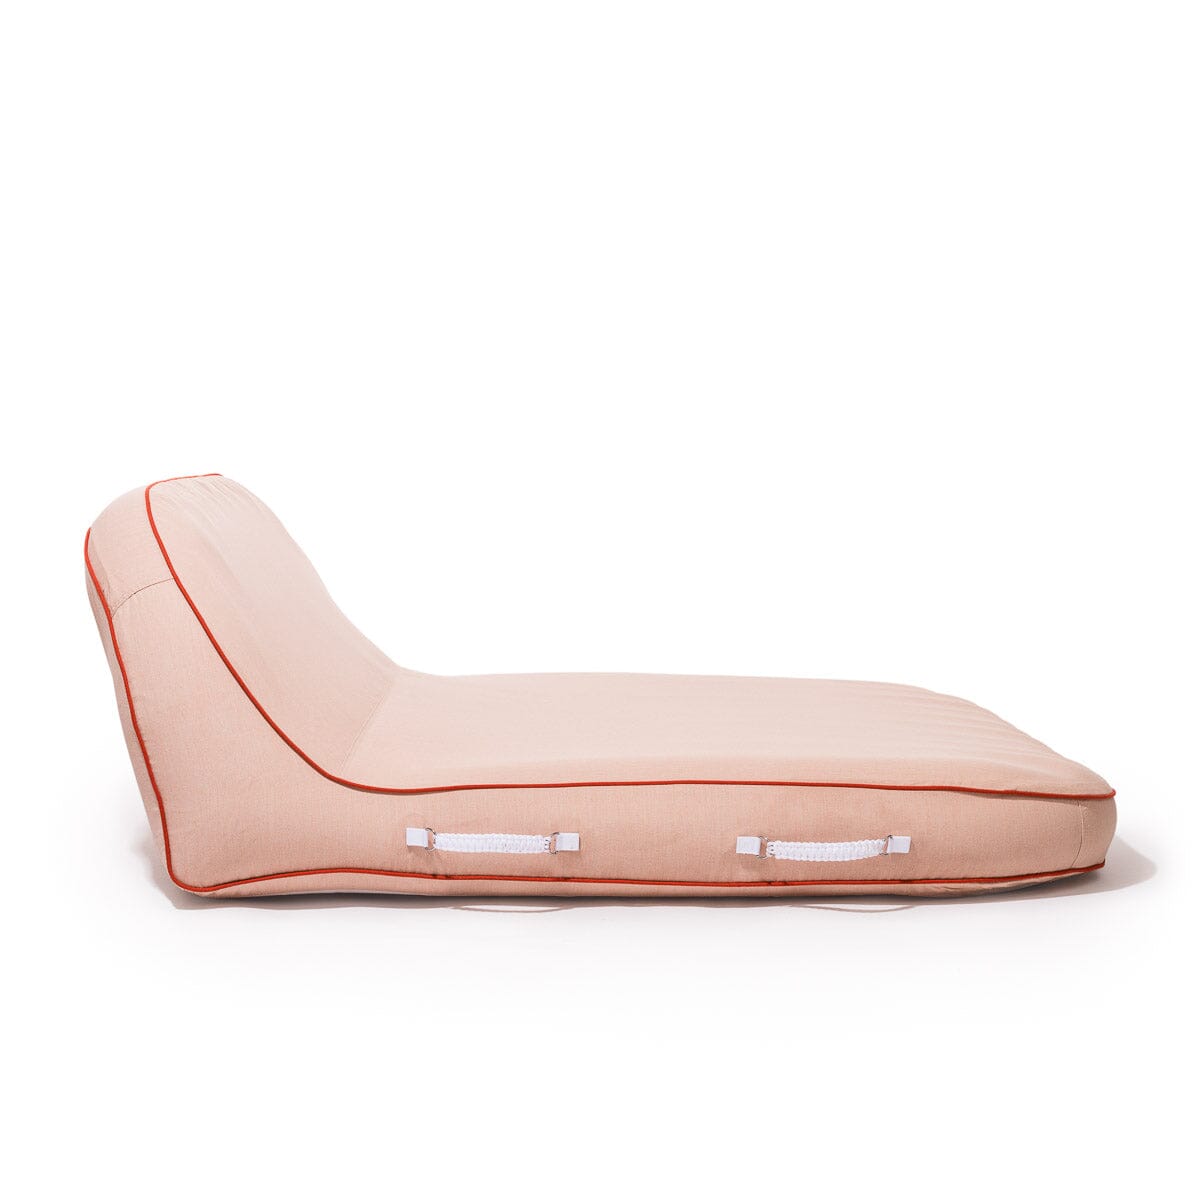 The Xl Pool Lounger - Rivie Pink Pool Lounger Business & Pleasure Co 